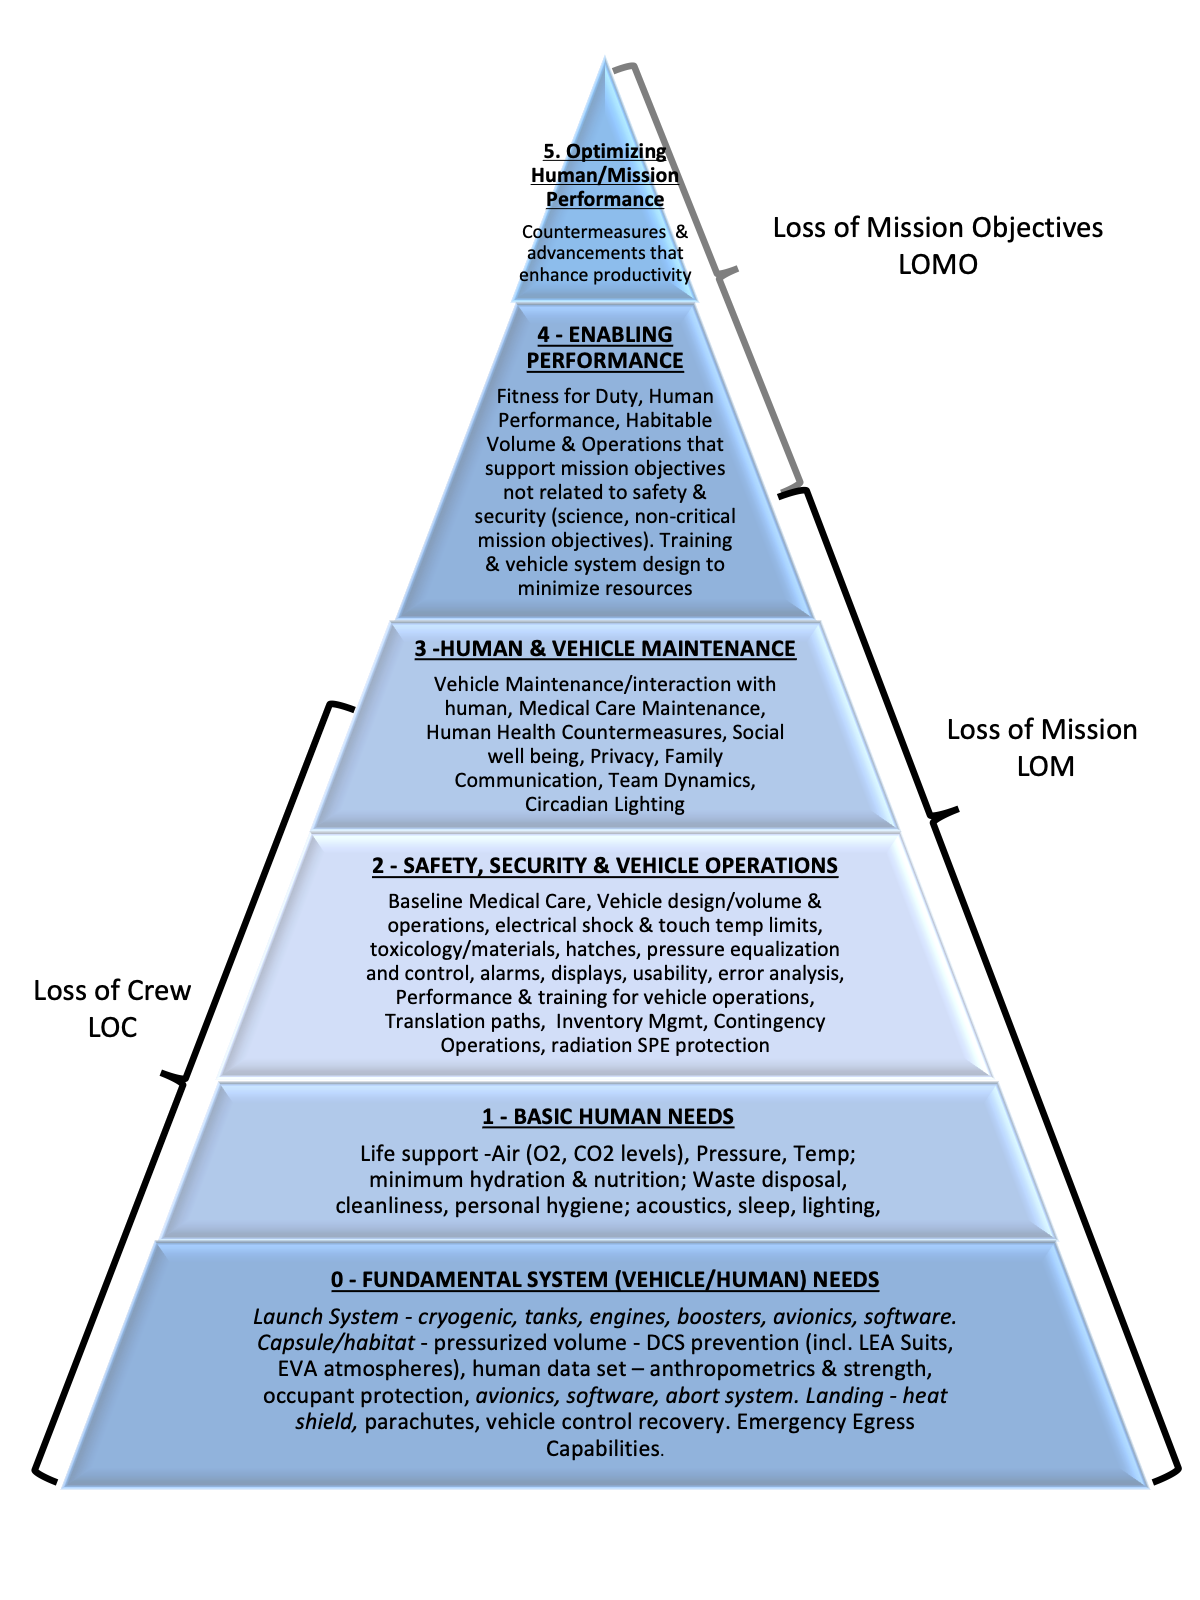 What's the pyramid of the watch hierarchy?